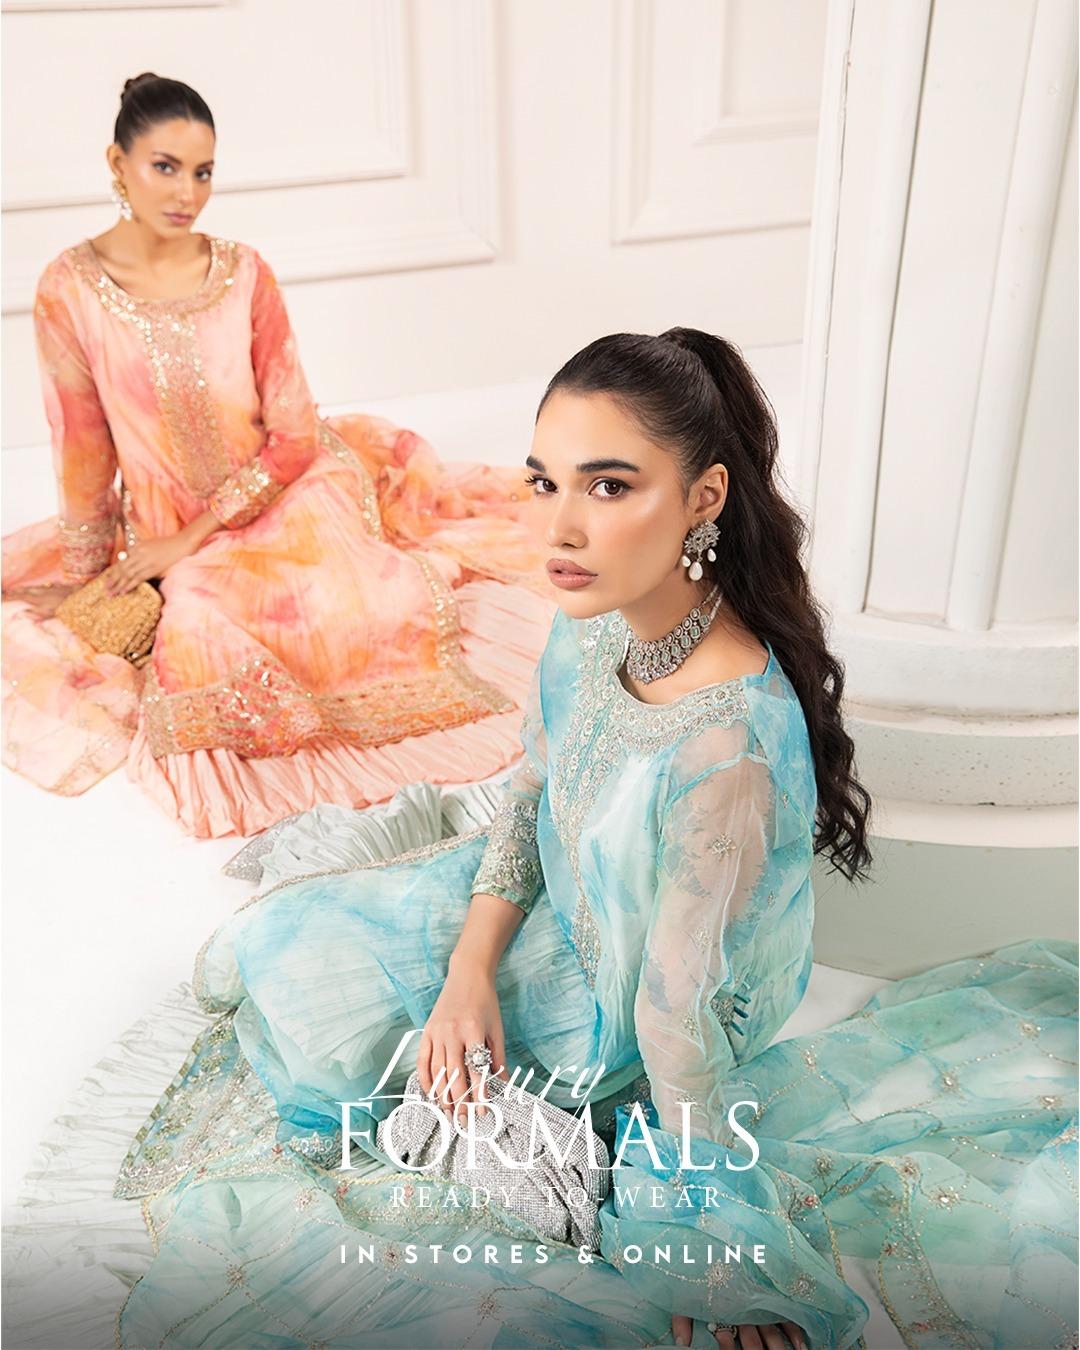 Live Now | Maria.B’s Luxury Formal Edition’ 24

Immerse yourself in the world of luxury and opulence with our stunning luxury formal collection, now available for you to own.

Product Code: SF-EF24-20

Explore the allure of grandeur in-stores or online at www.mariab.pk/collections/new-arrivals-evening-wears or click the link in bio.

#mariab #mariabofficial #luxuryformal #luxuryformalbyMariab #mariabpakistan #madeinpakistan #eidedition #mariabuae #festivewear #weddingweardress #opulentcharm #pakistanidresses #regalbeauty #easternwear #regalelegance #designerwear #livenow